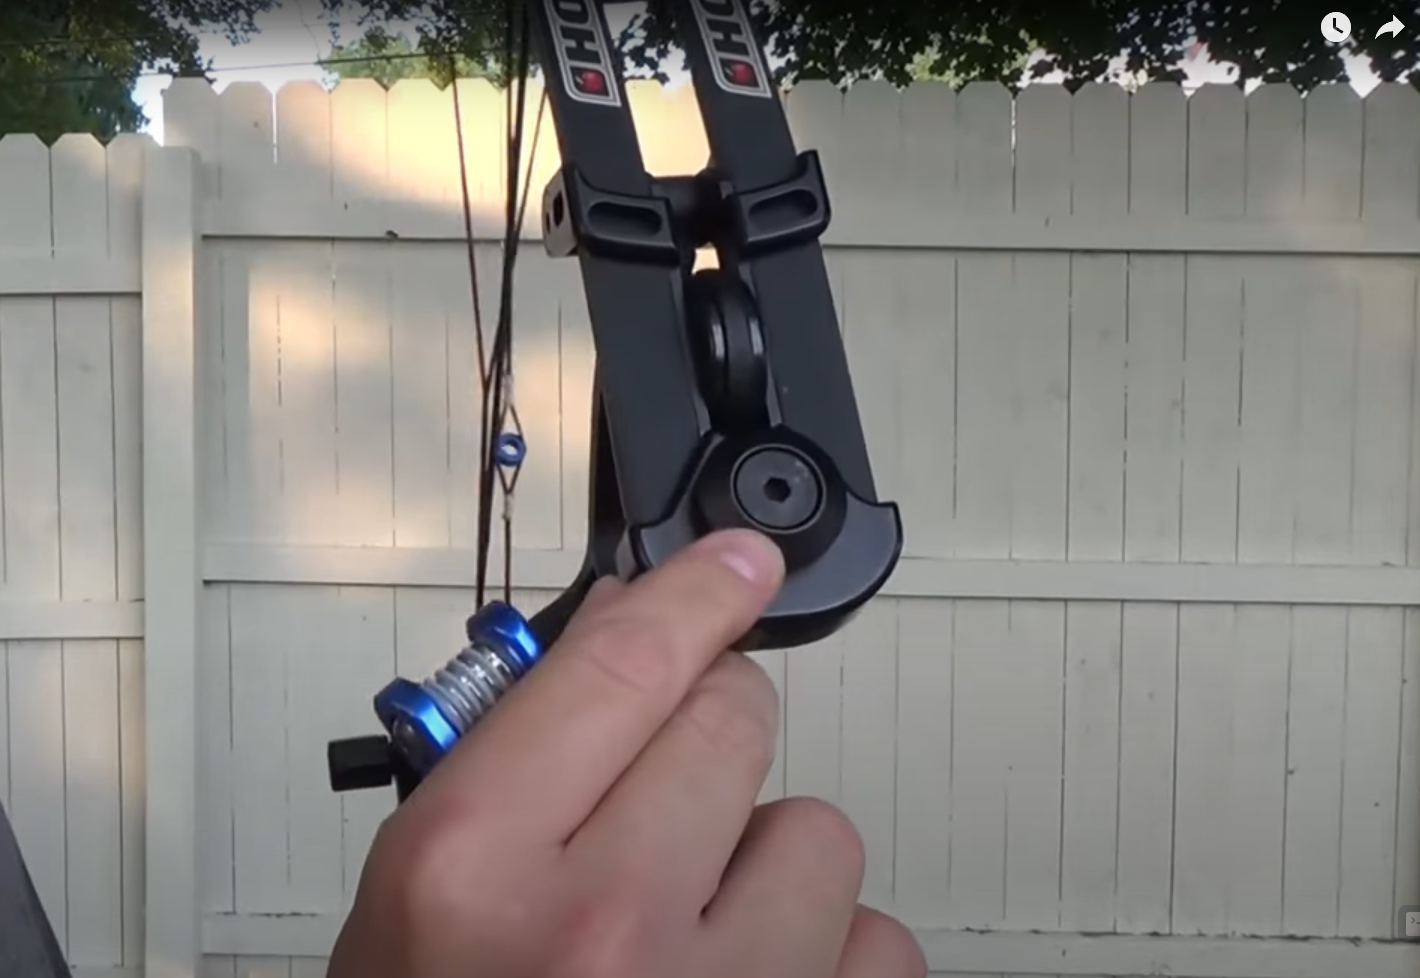 Limb Bolts on a Compound Bow are Used to